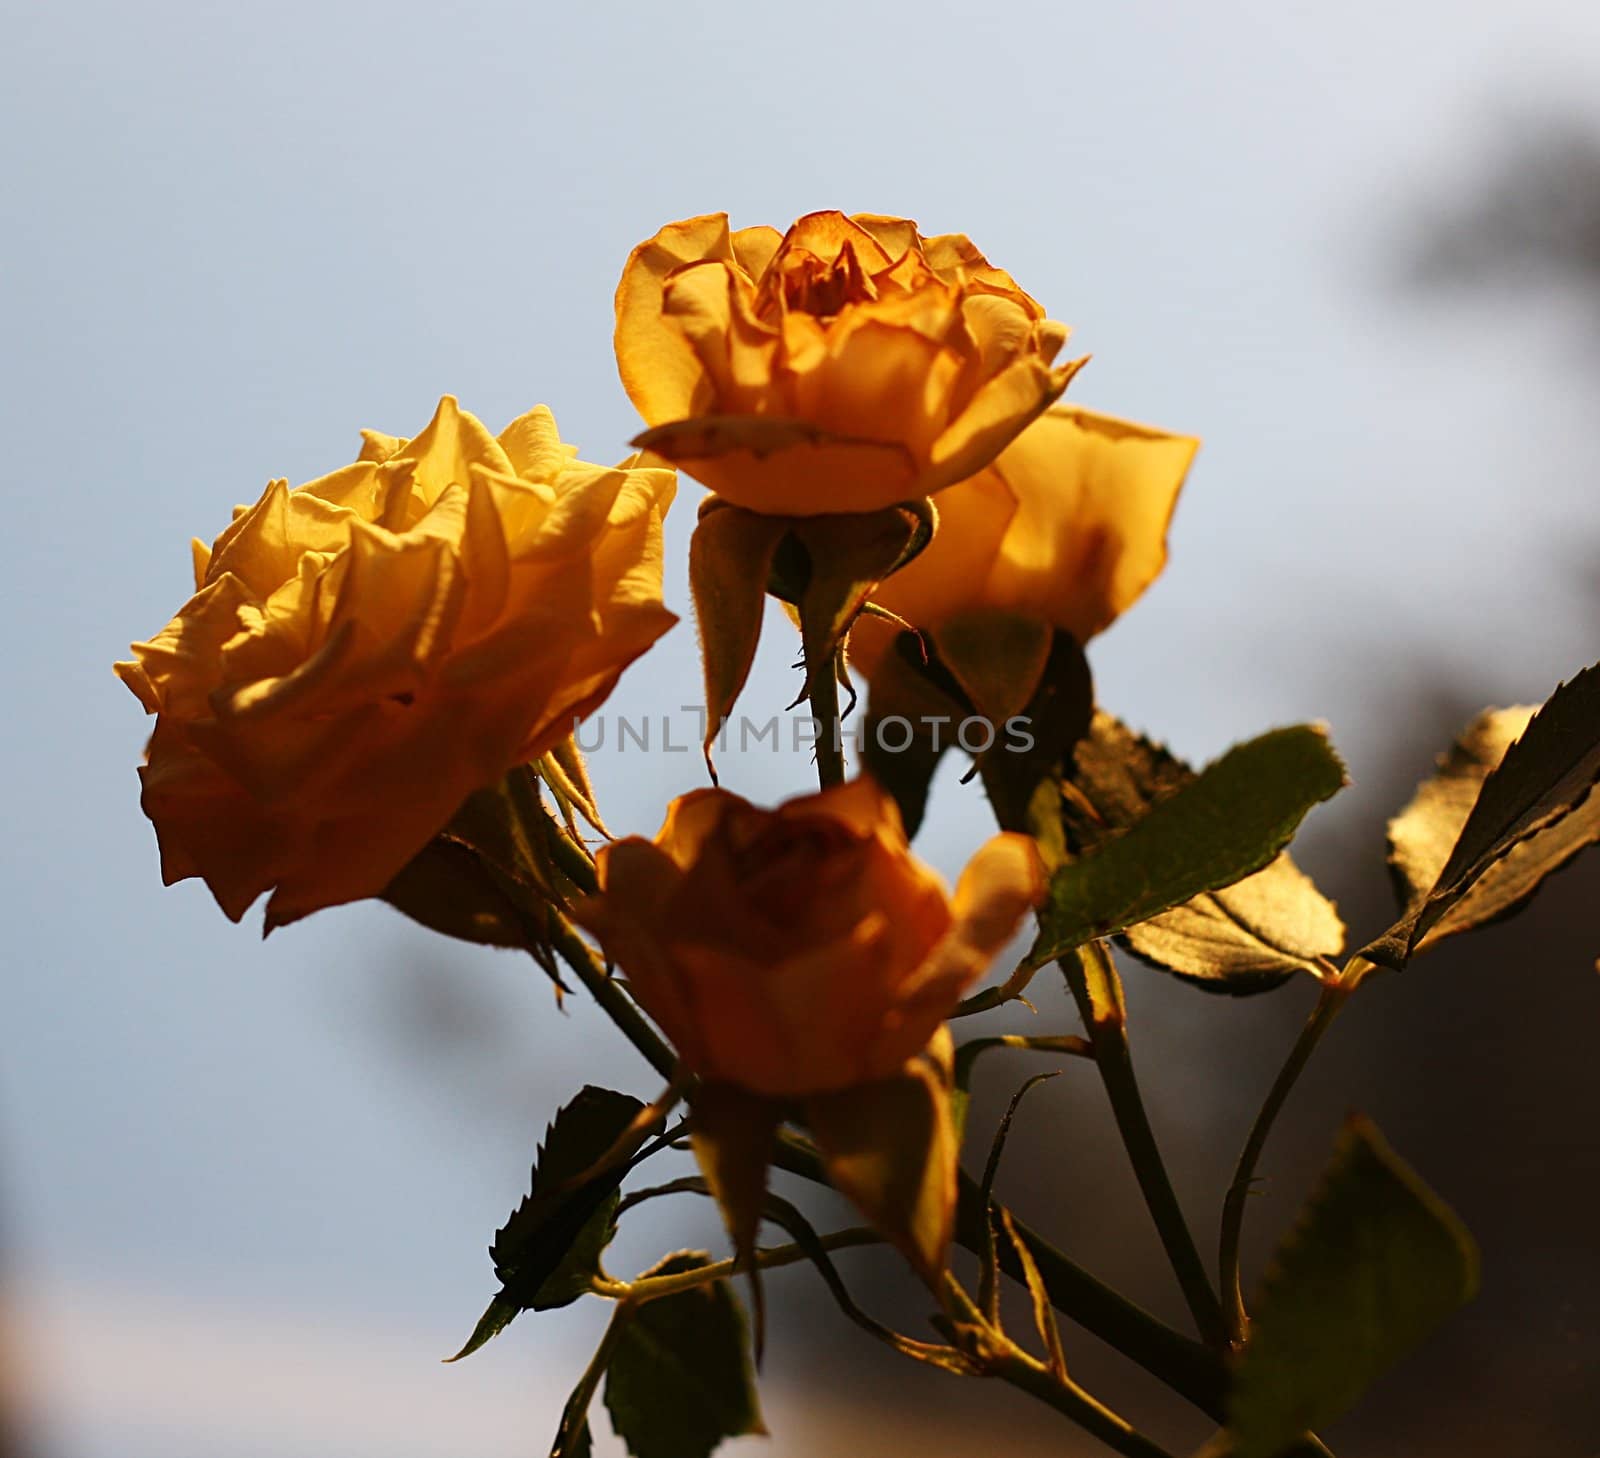 Four yellow roses illuminated by the evening sun